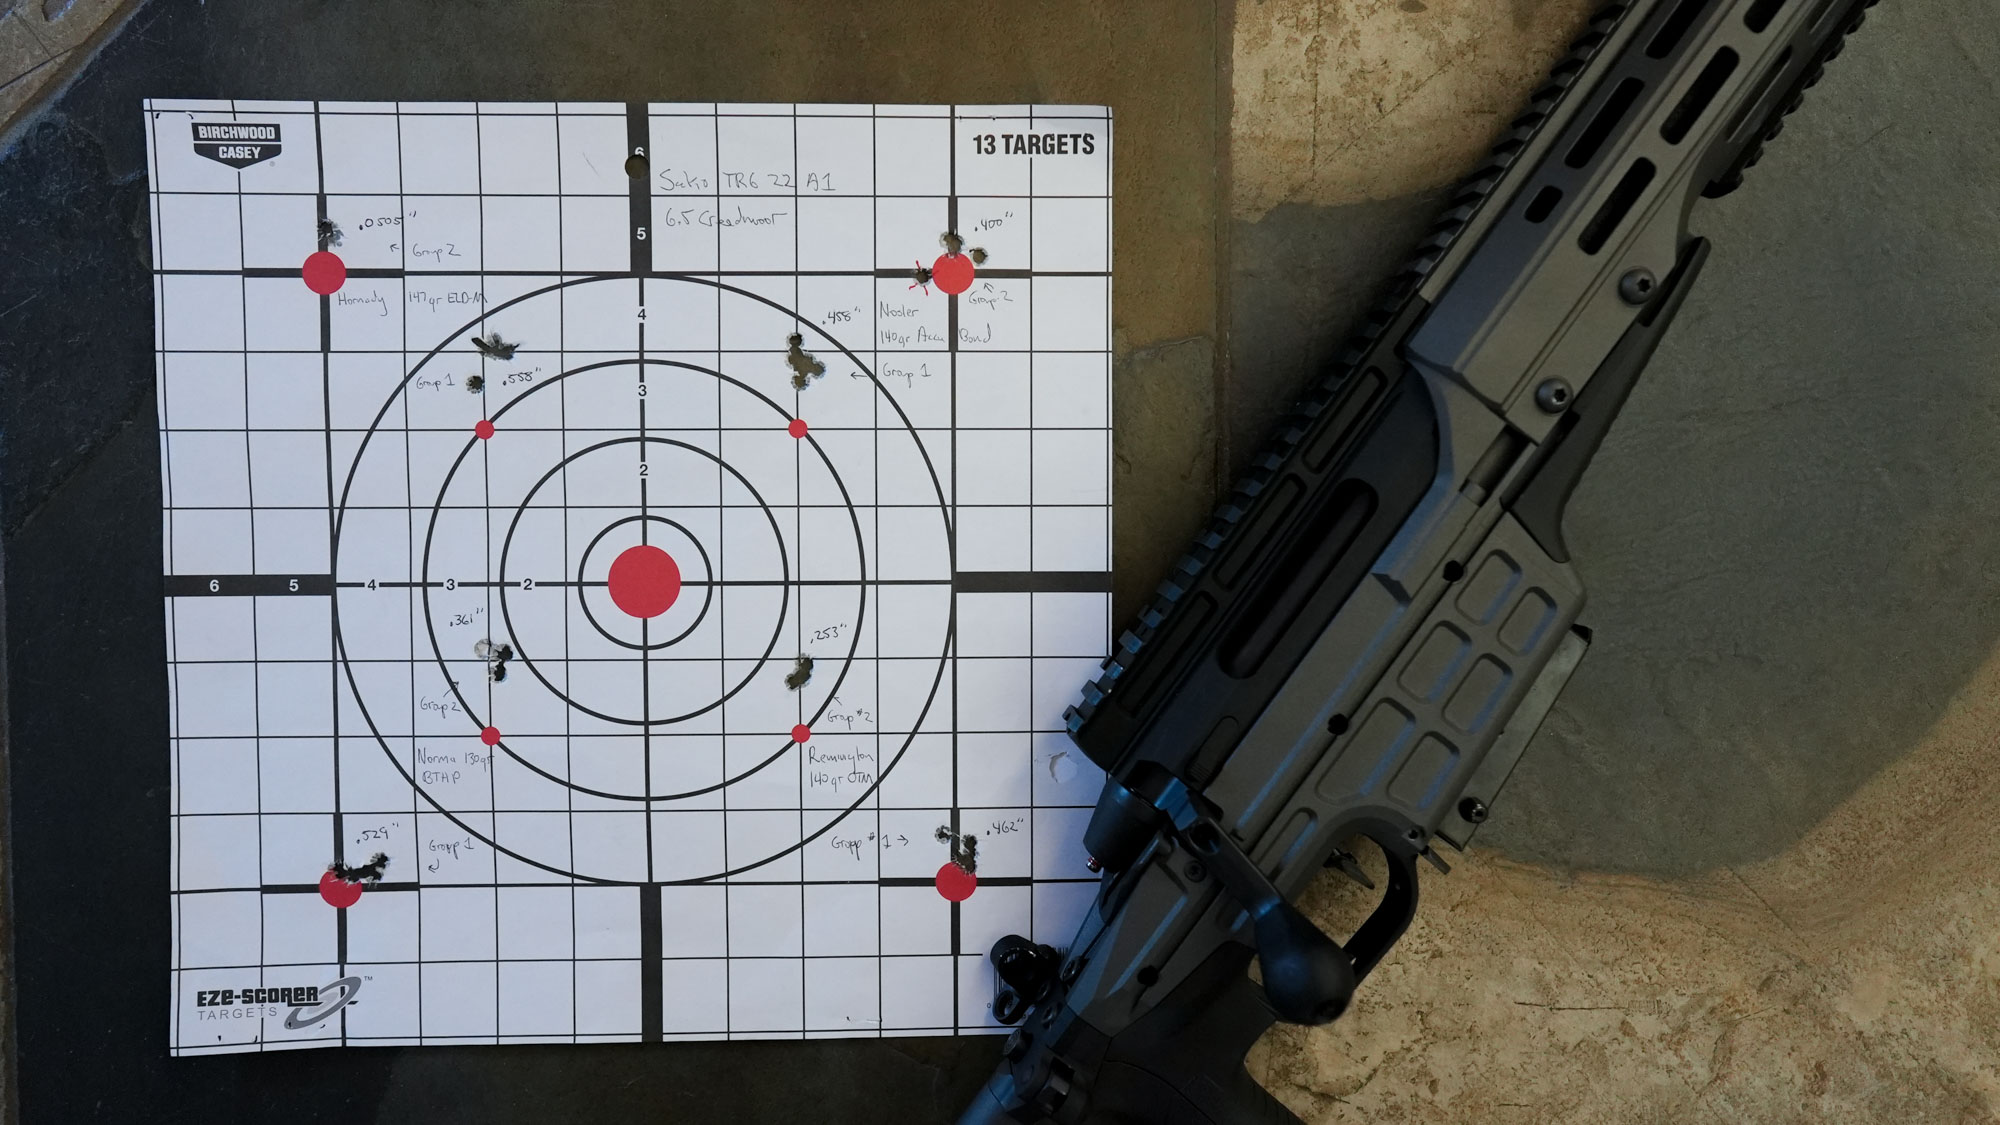 Sako TRG 22 A1, Tested and Reviewed